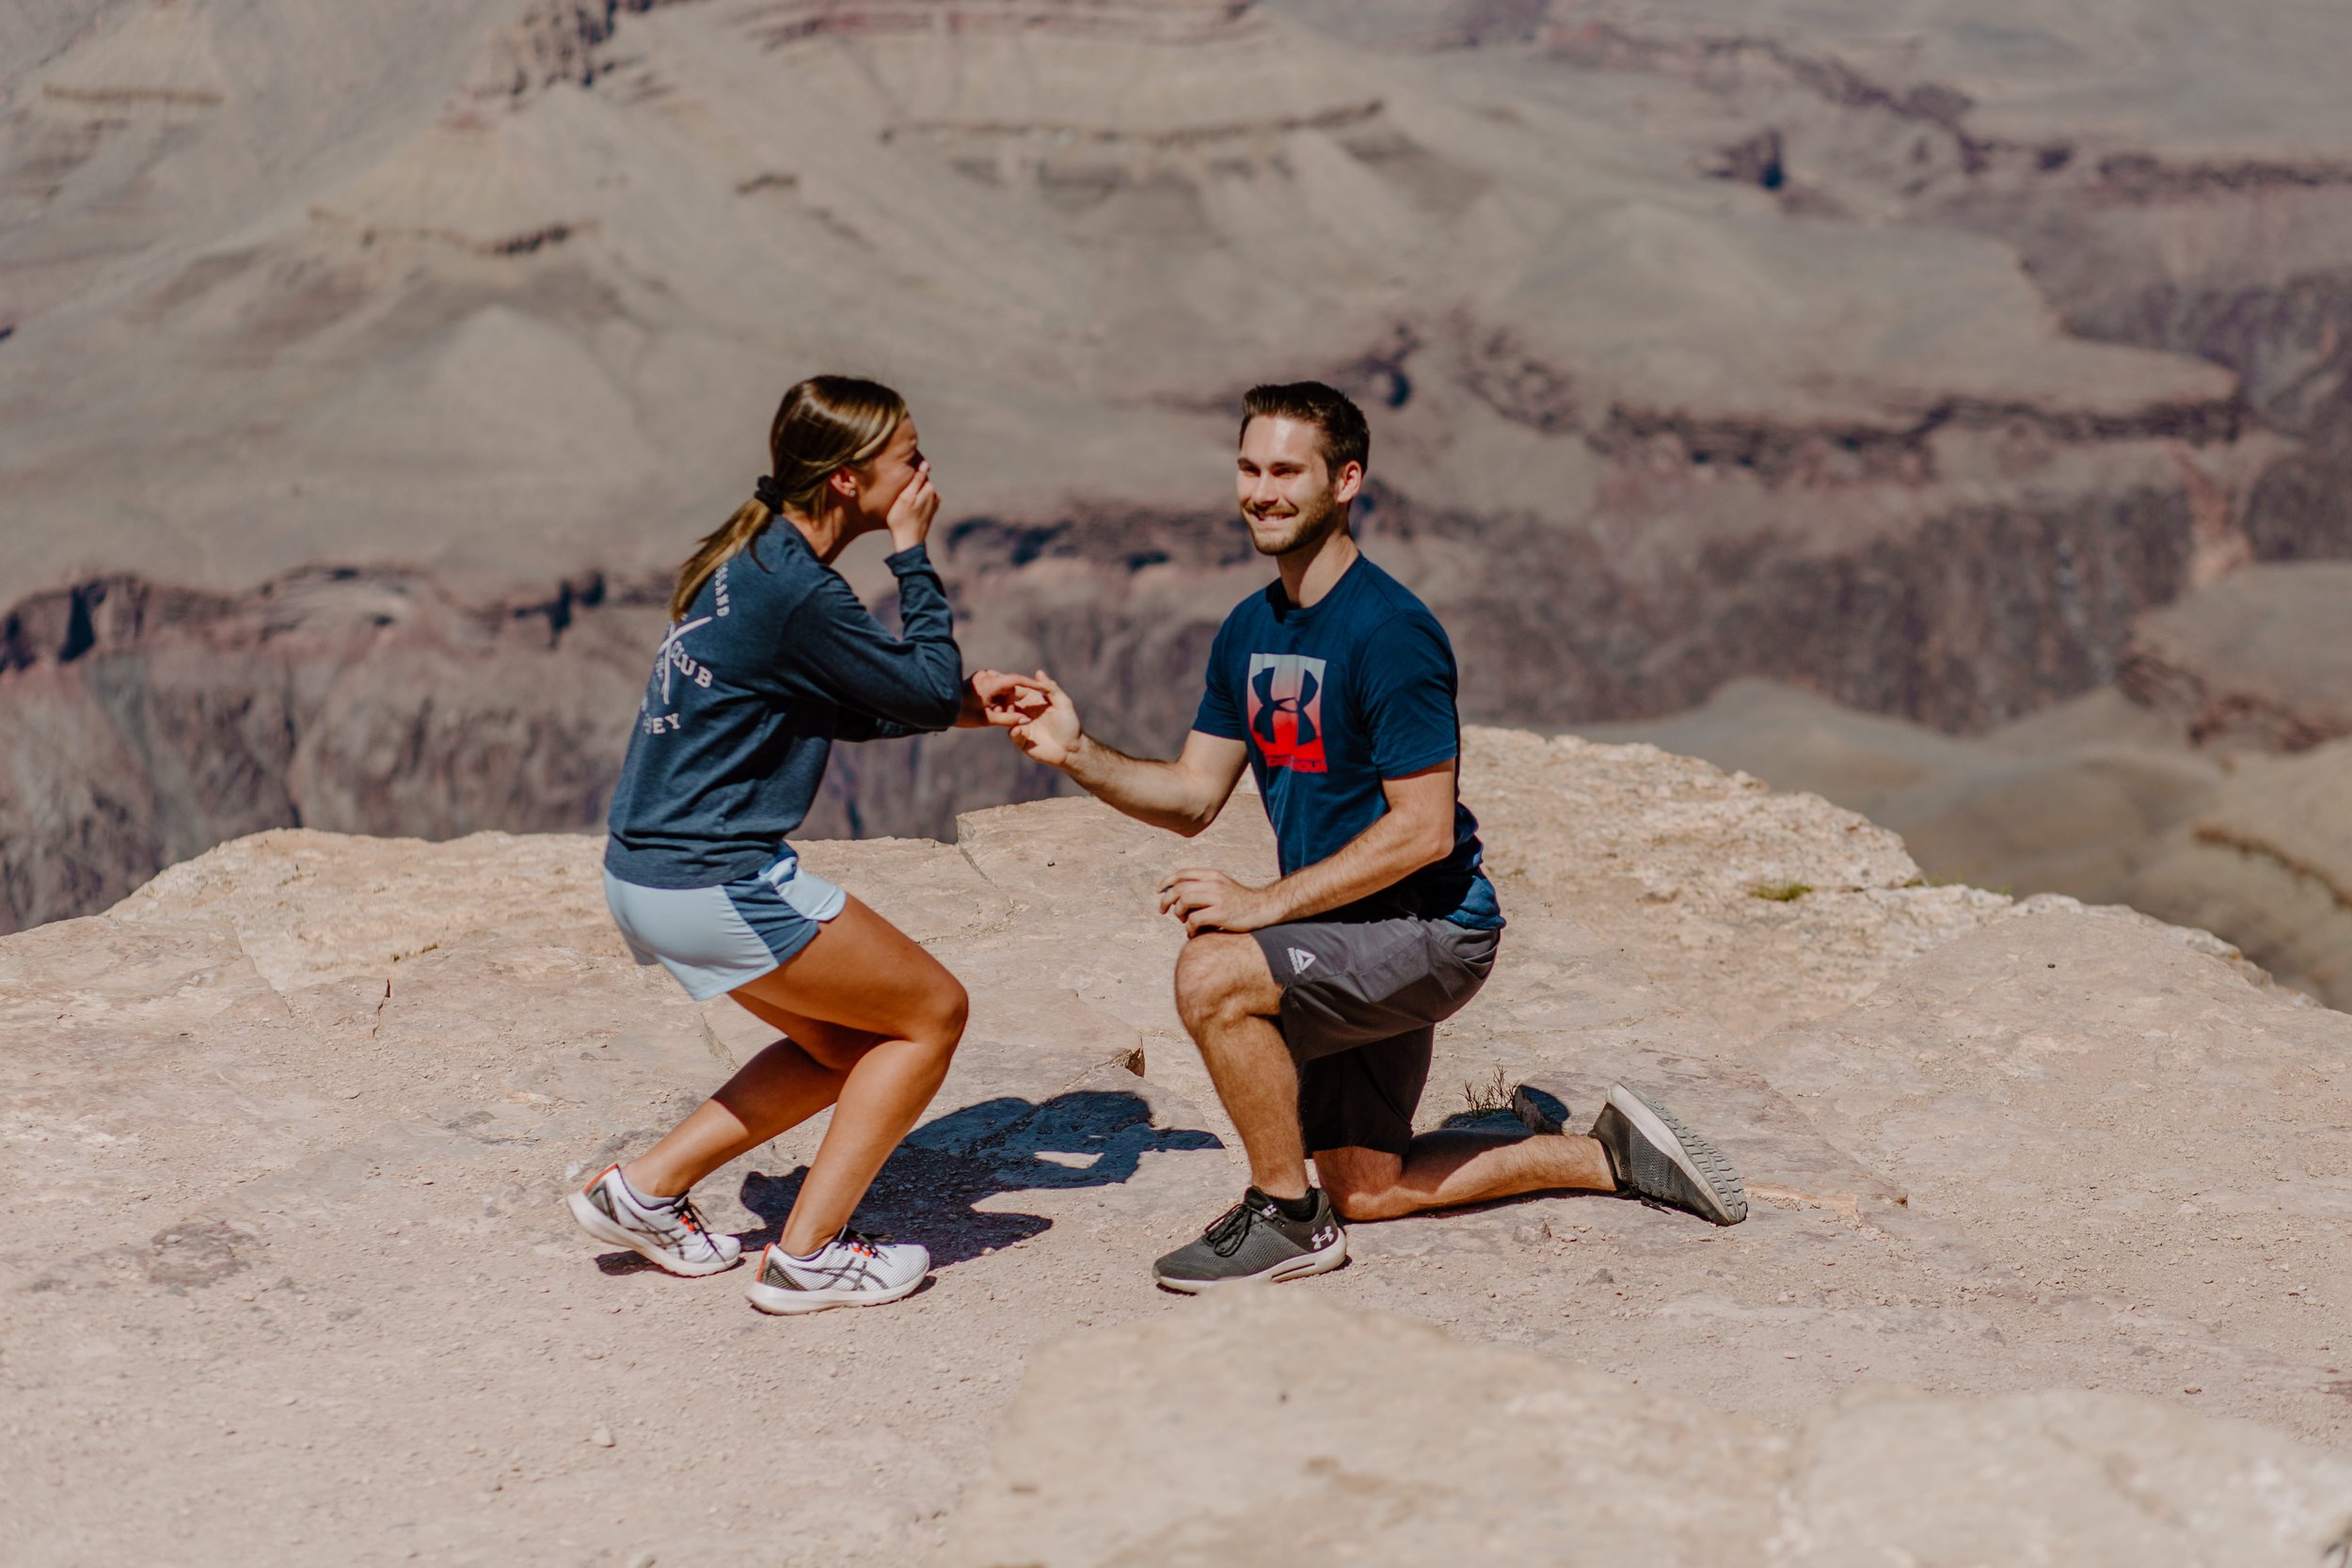  Man proposes to his girlfriend at the edge of the Grand Canyon and she cries and reacts very happily 